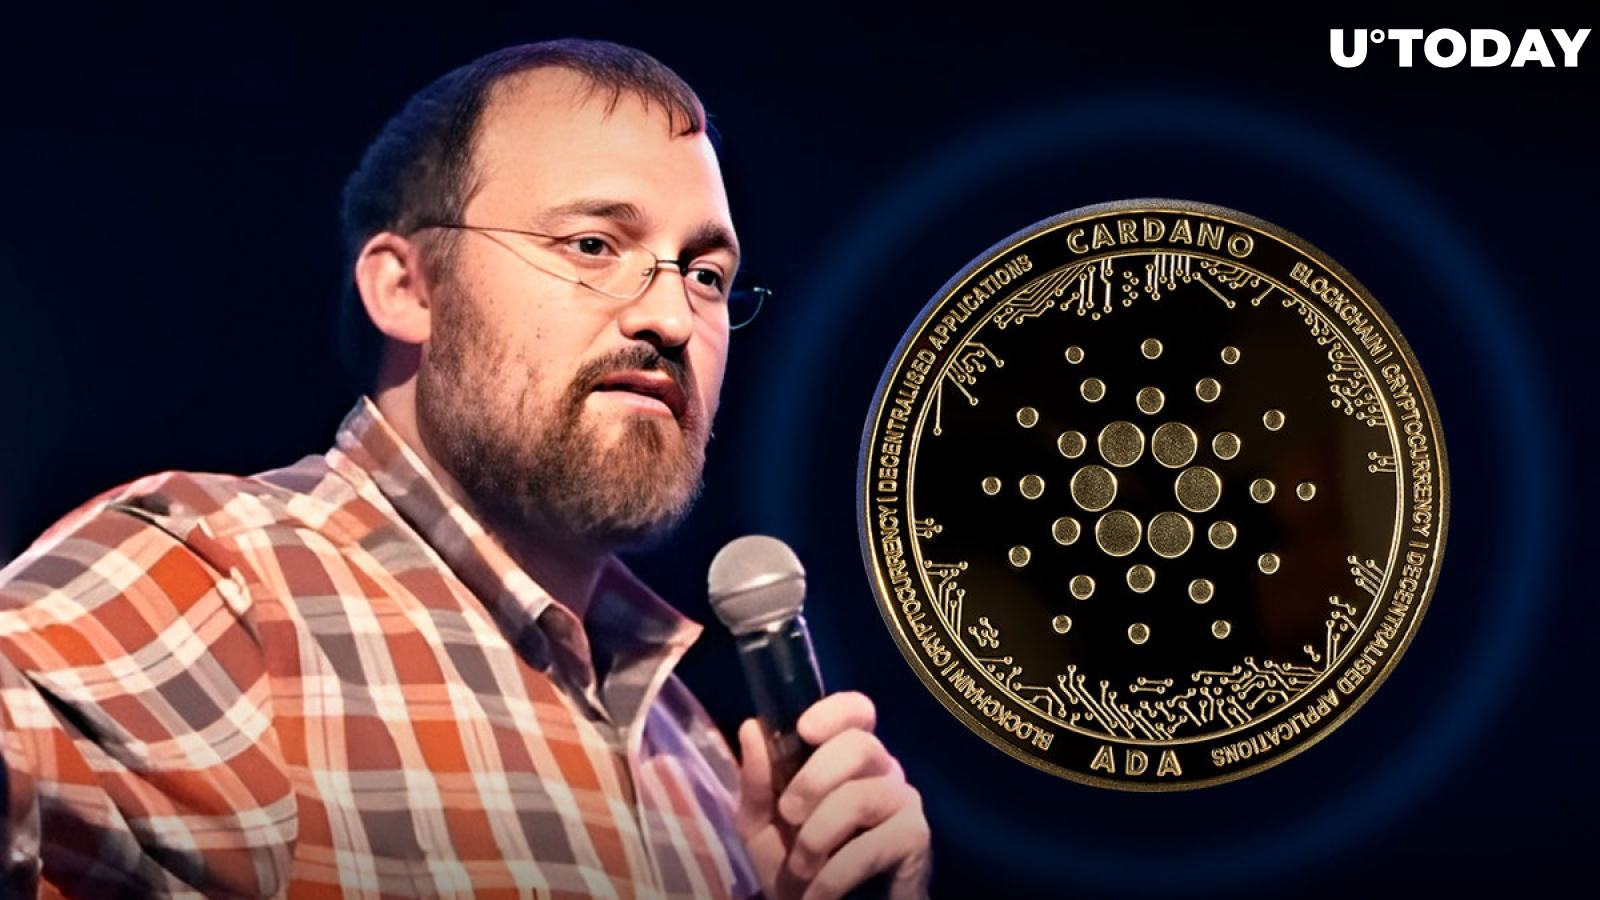 Cardano Founder on Scaling: 'Things Could Move Very Fast'